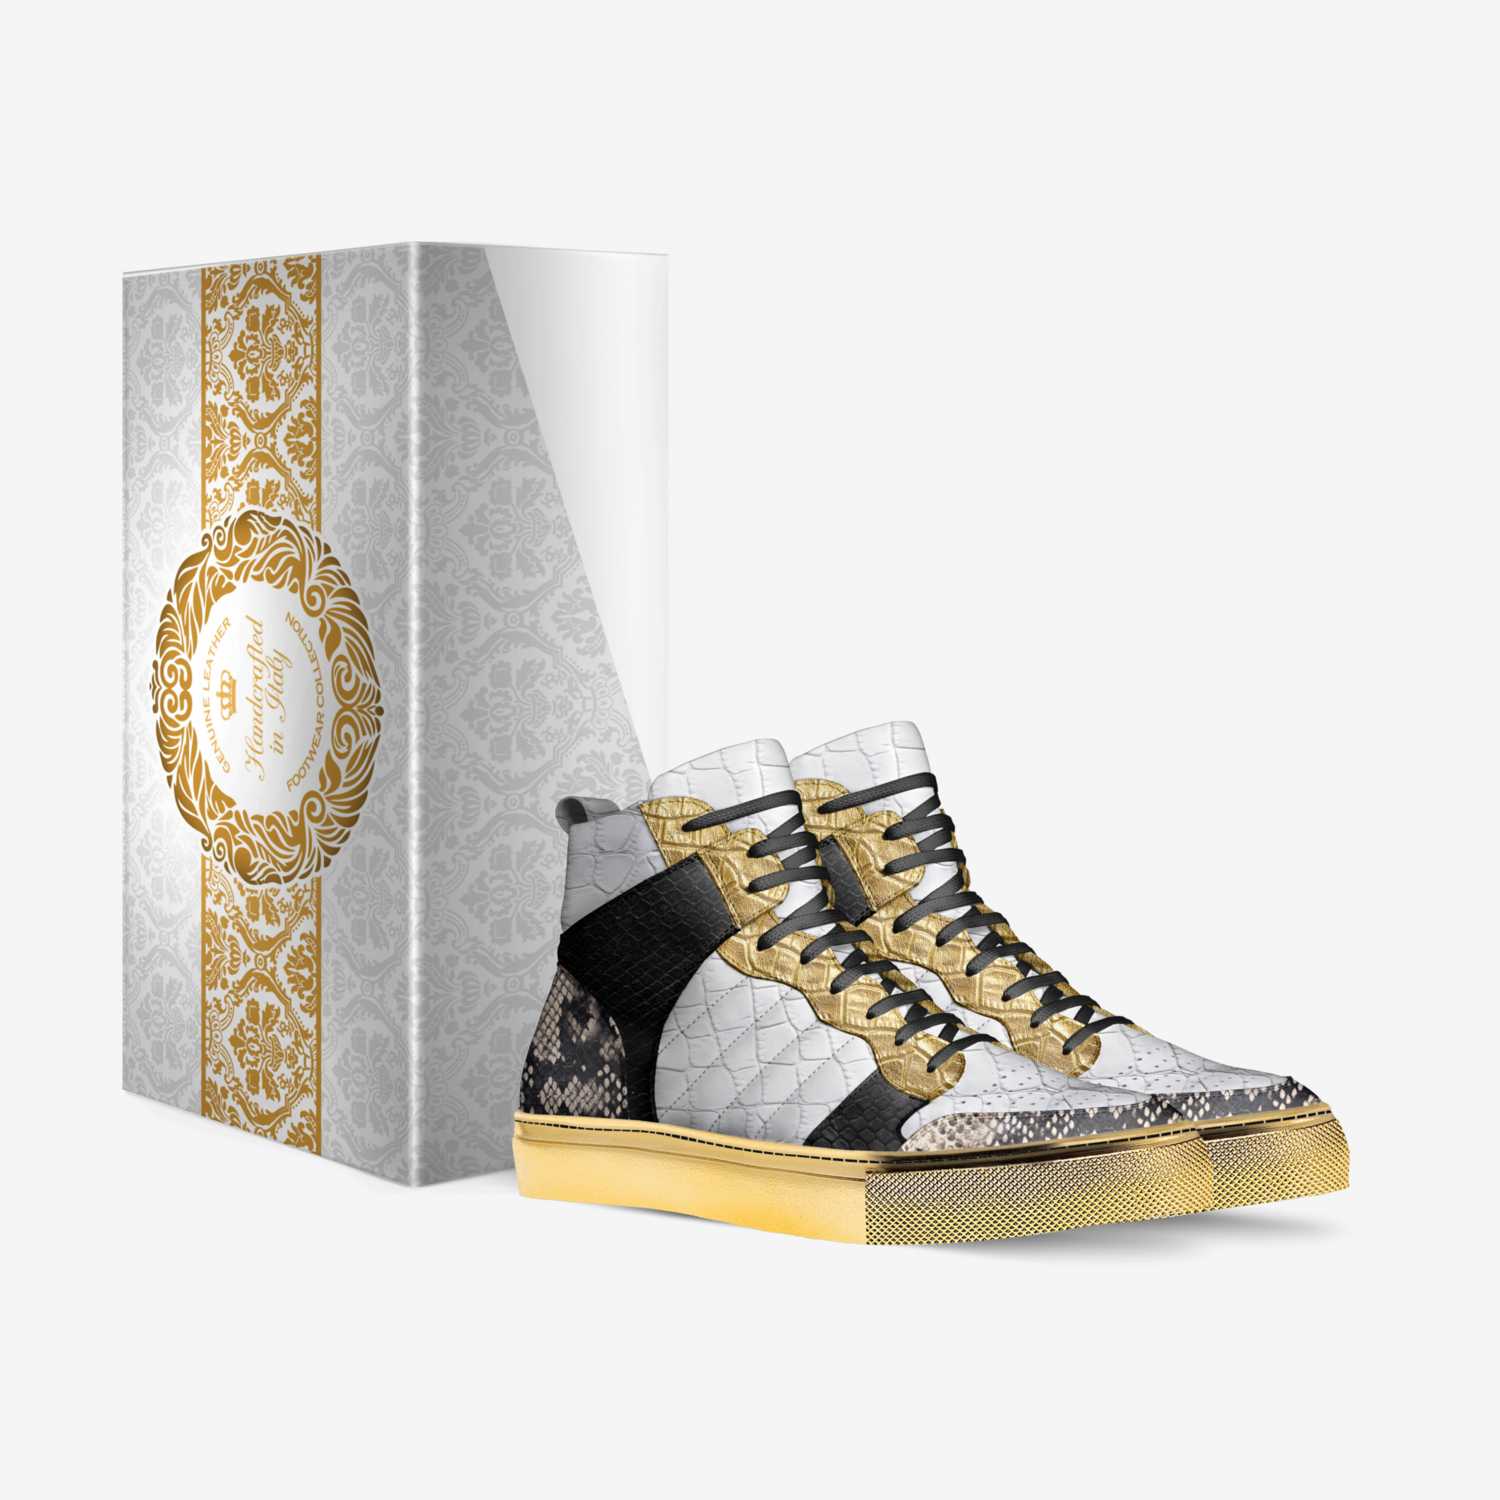 Judo custom made in Italy shoes by Jamari Neal | Box view